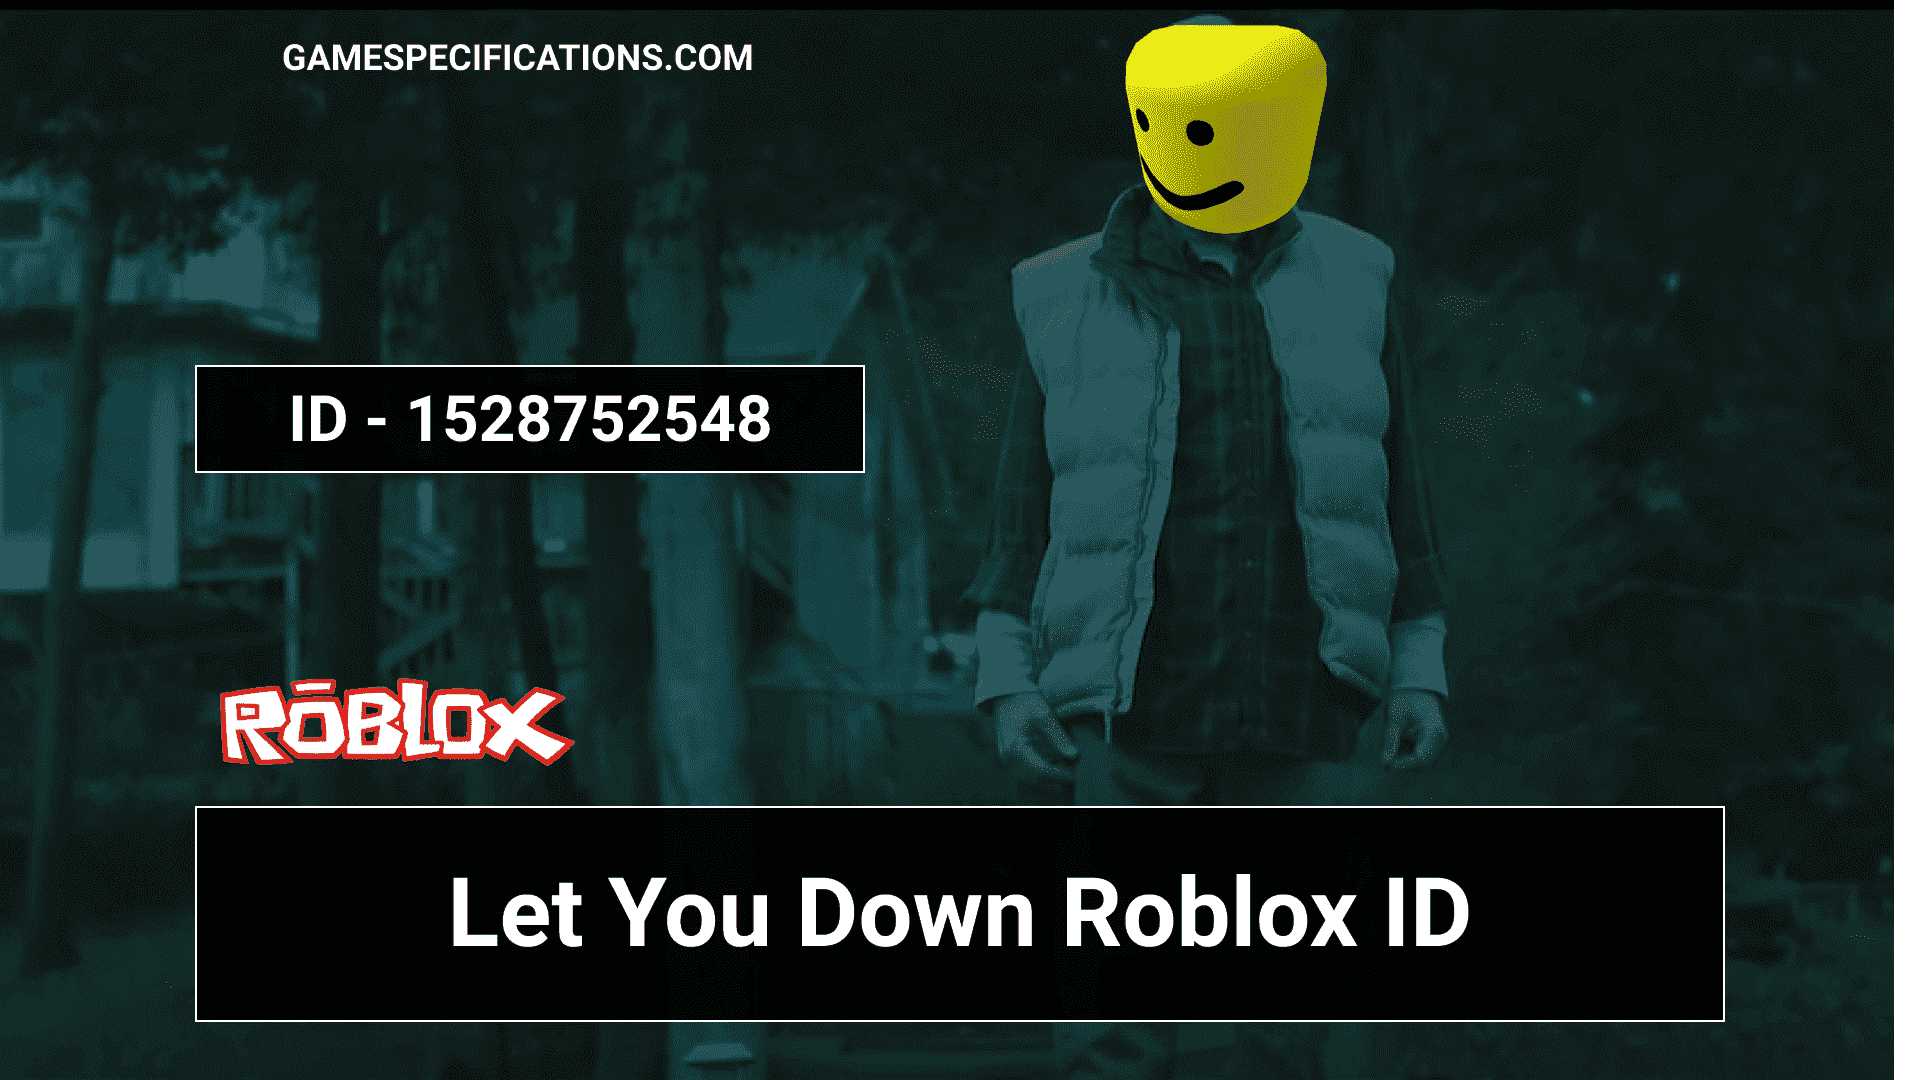 Let You Down Roblox Id Codes To Play The Nf Music 2021 Game Specifications - falling down roblox id bypassed